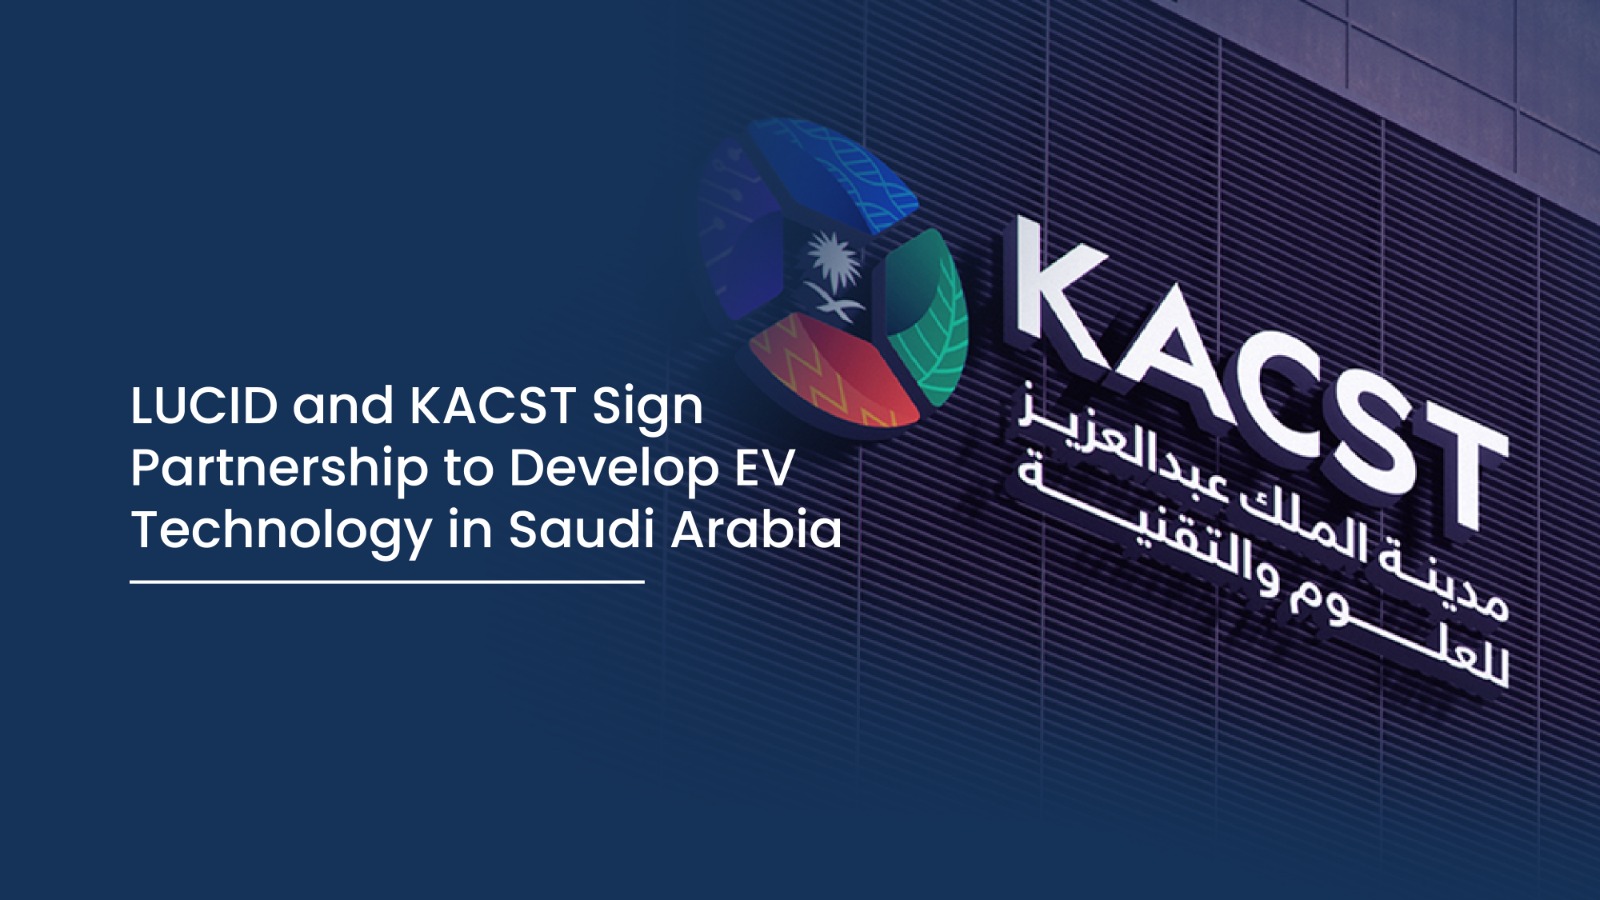 LUCID and KACST Sign Partnership to Develop EV Technology in Saudi Arabia